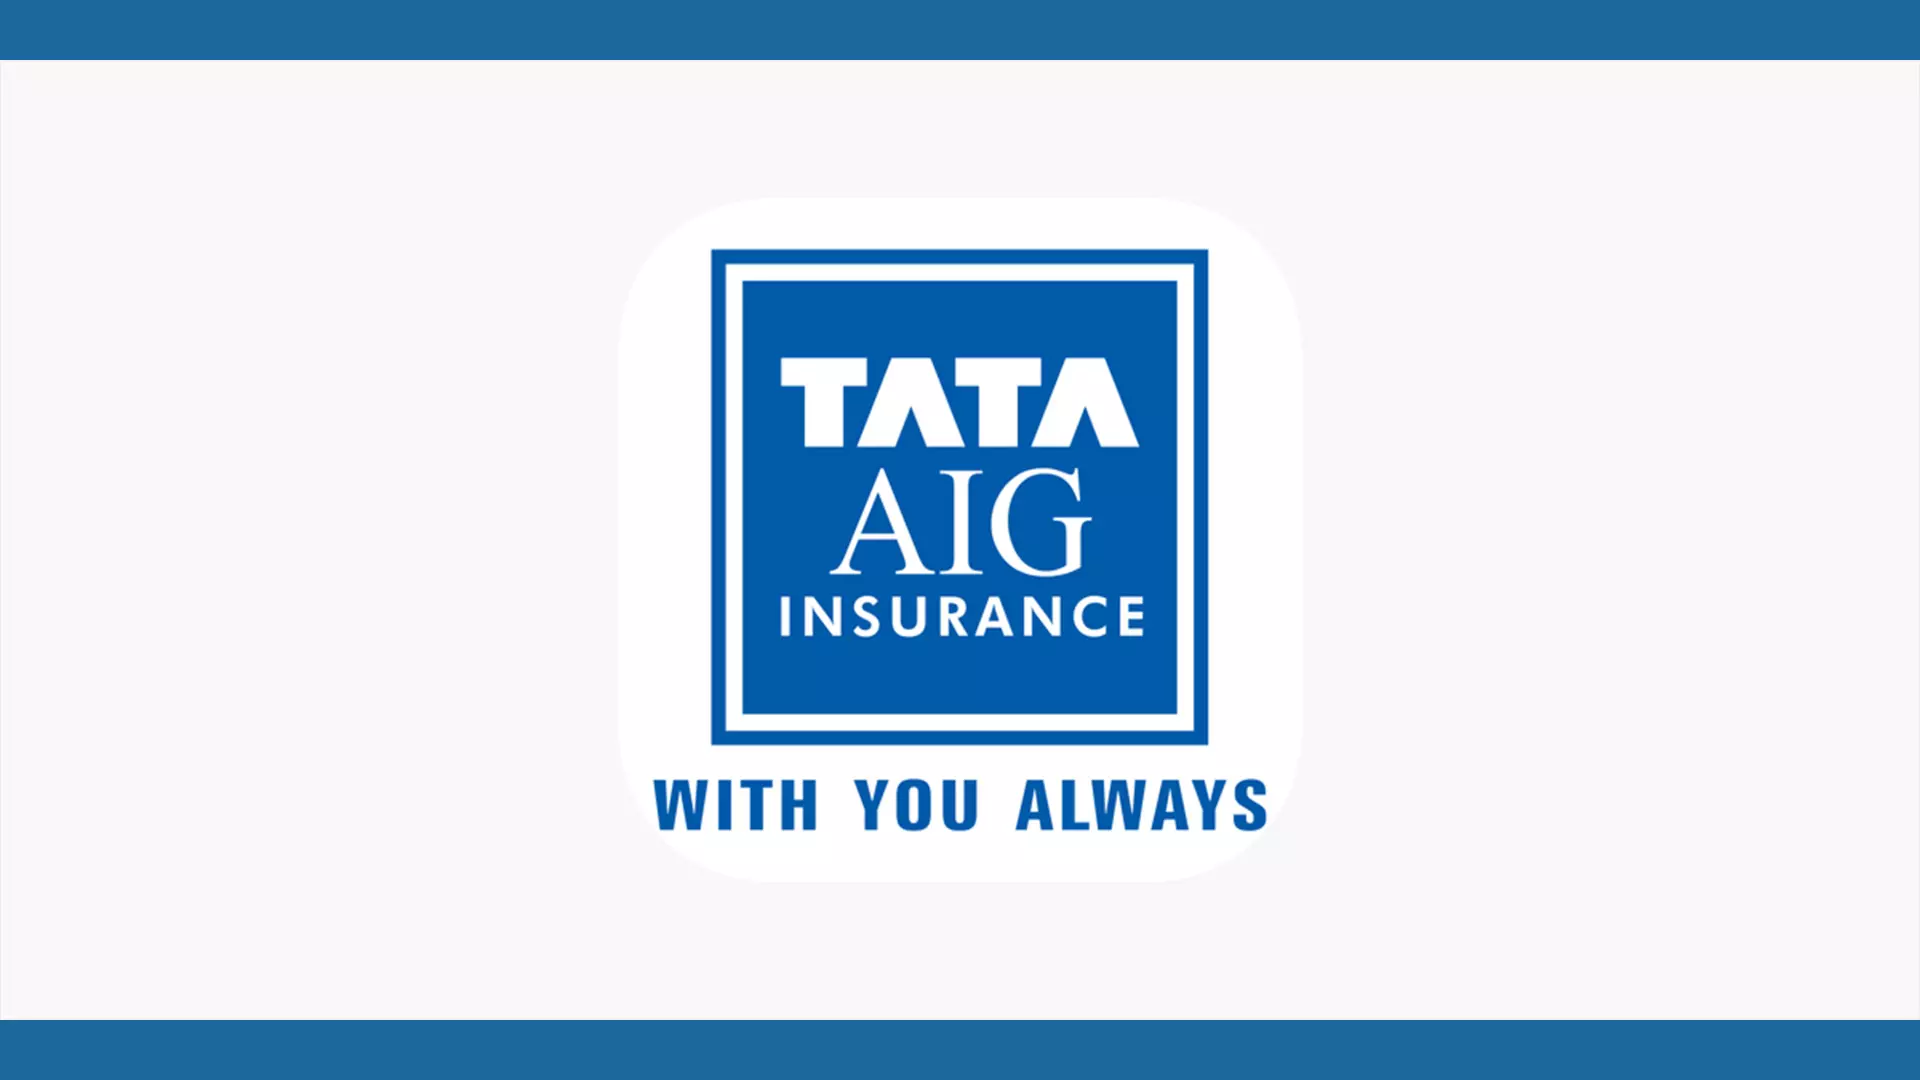 Rewari District Commission Holds TATA AIG General Insurance Co. Liable For Repudiating Medical Claim Based On Unsubstantiated And Unclear Grounds